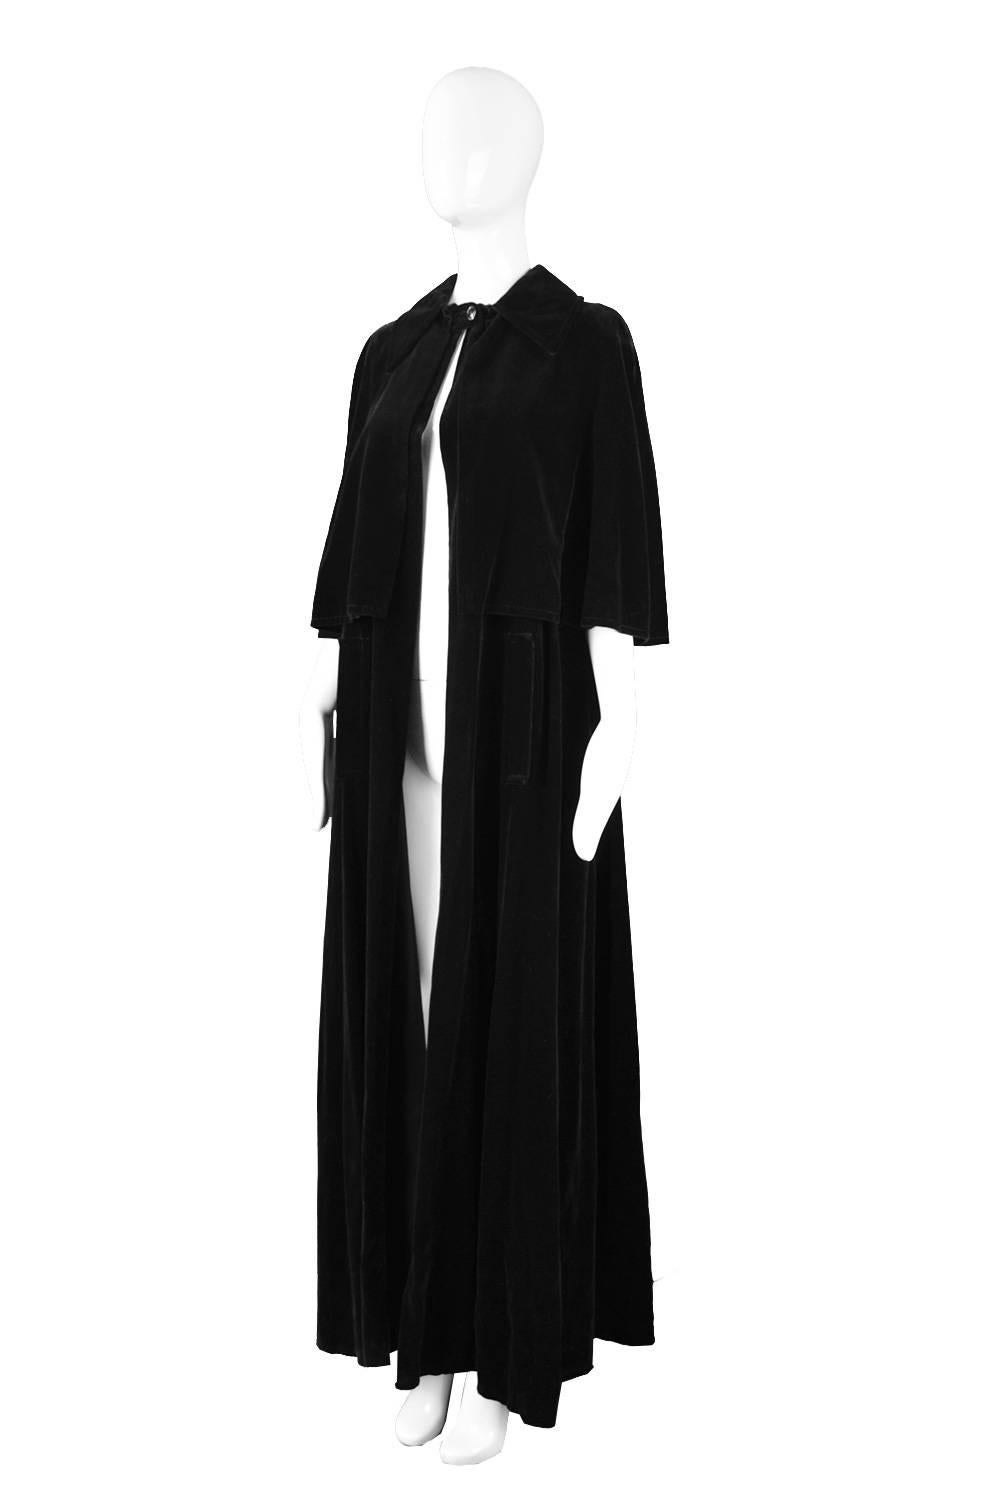 A rare, dramatic and sophisticated vintage full length cape/ cloak by couturier and highly collectible French designer, Louis Feraud c.late 1960s or early 1970s. 

Size: Women's Small to Large - not meant to be fitted.
Bust - Up to 44” /